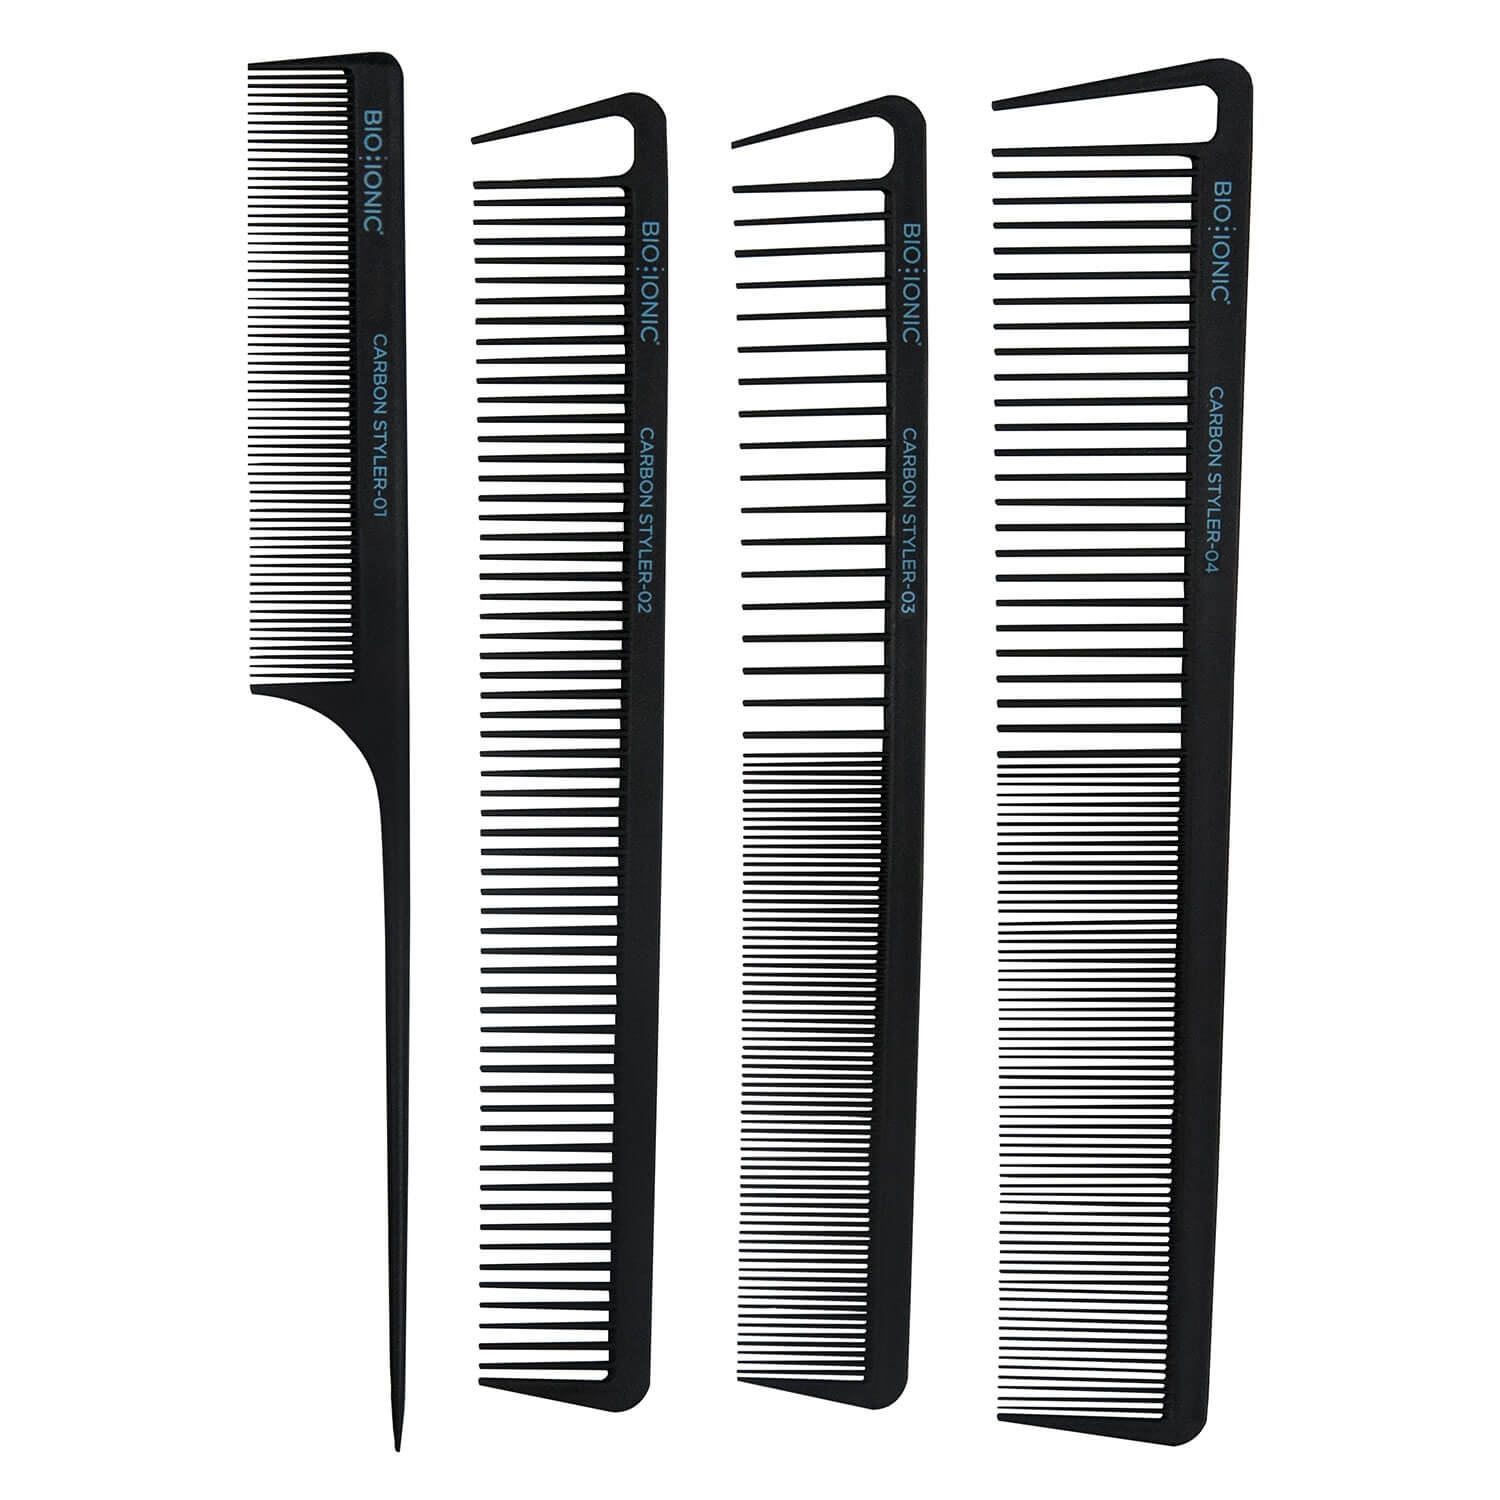 Product image from iTools - Carbon Styler Comb Set